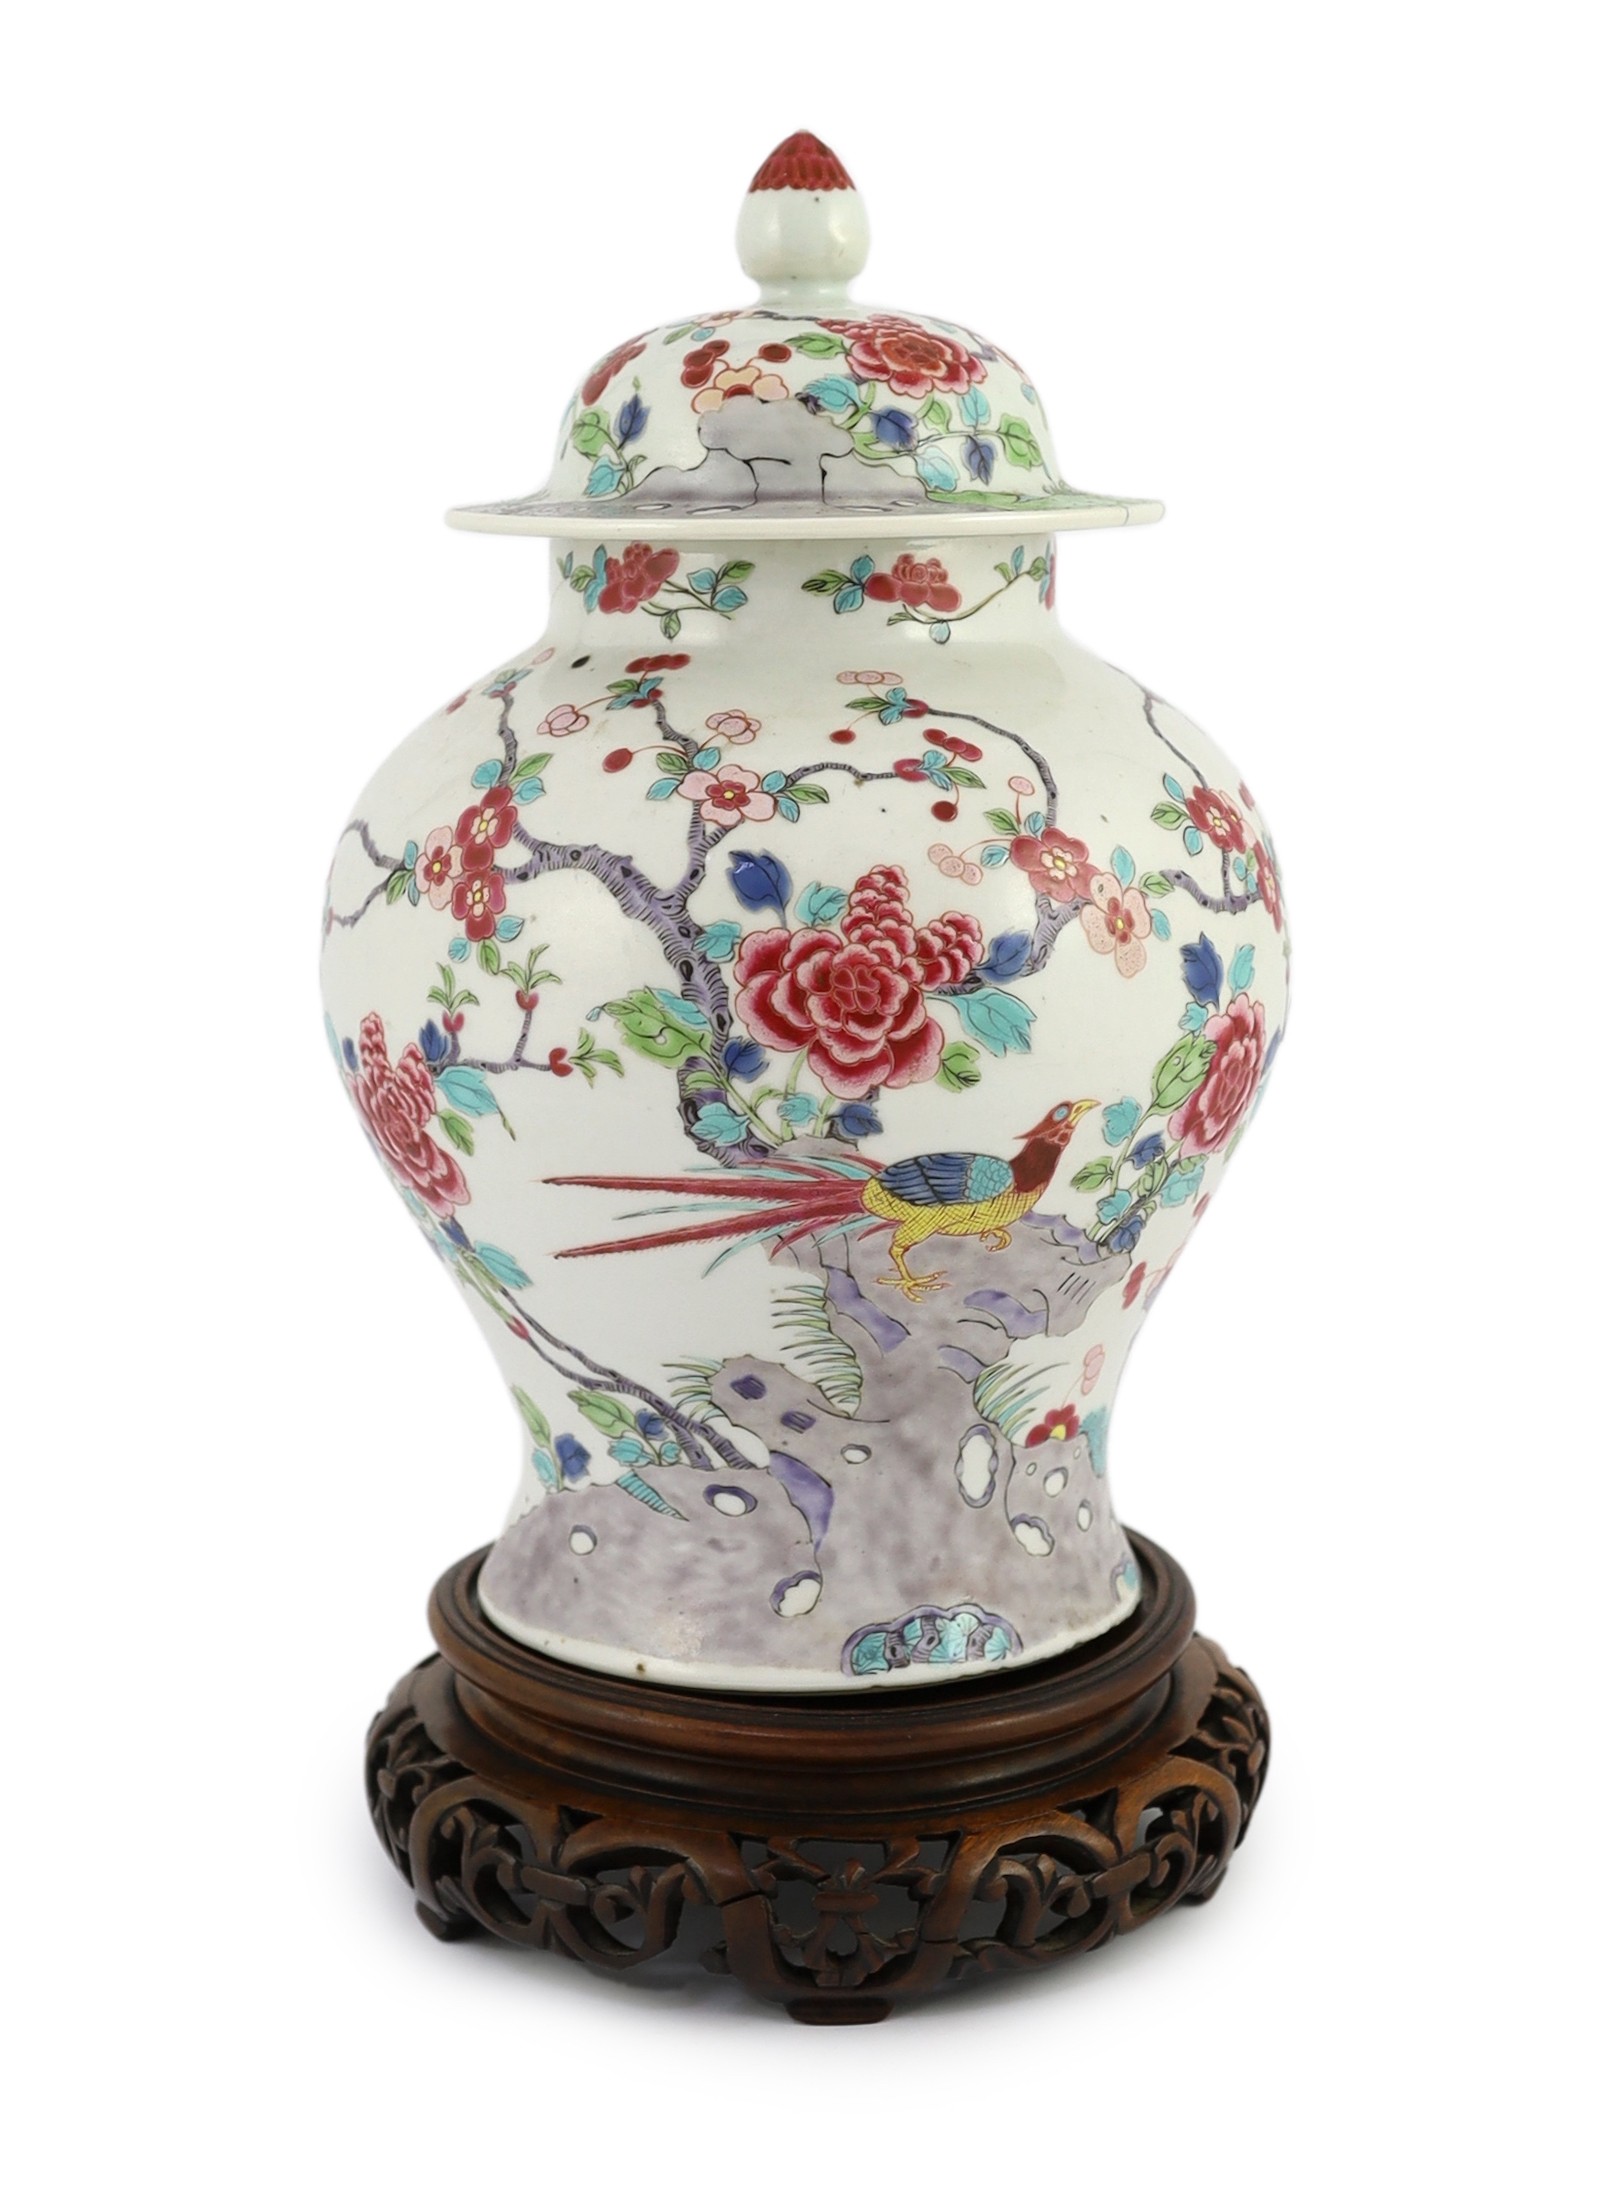 A Chinese famille rose fencai 'pheasant' vase and cover, 19th century, Jiaqing-Daoguang period, 28cm high, small faults to cover, wood stand